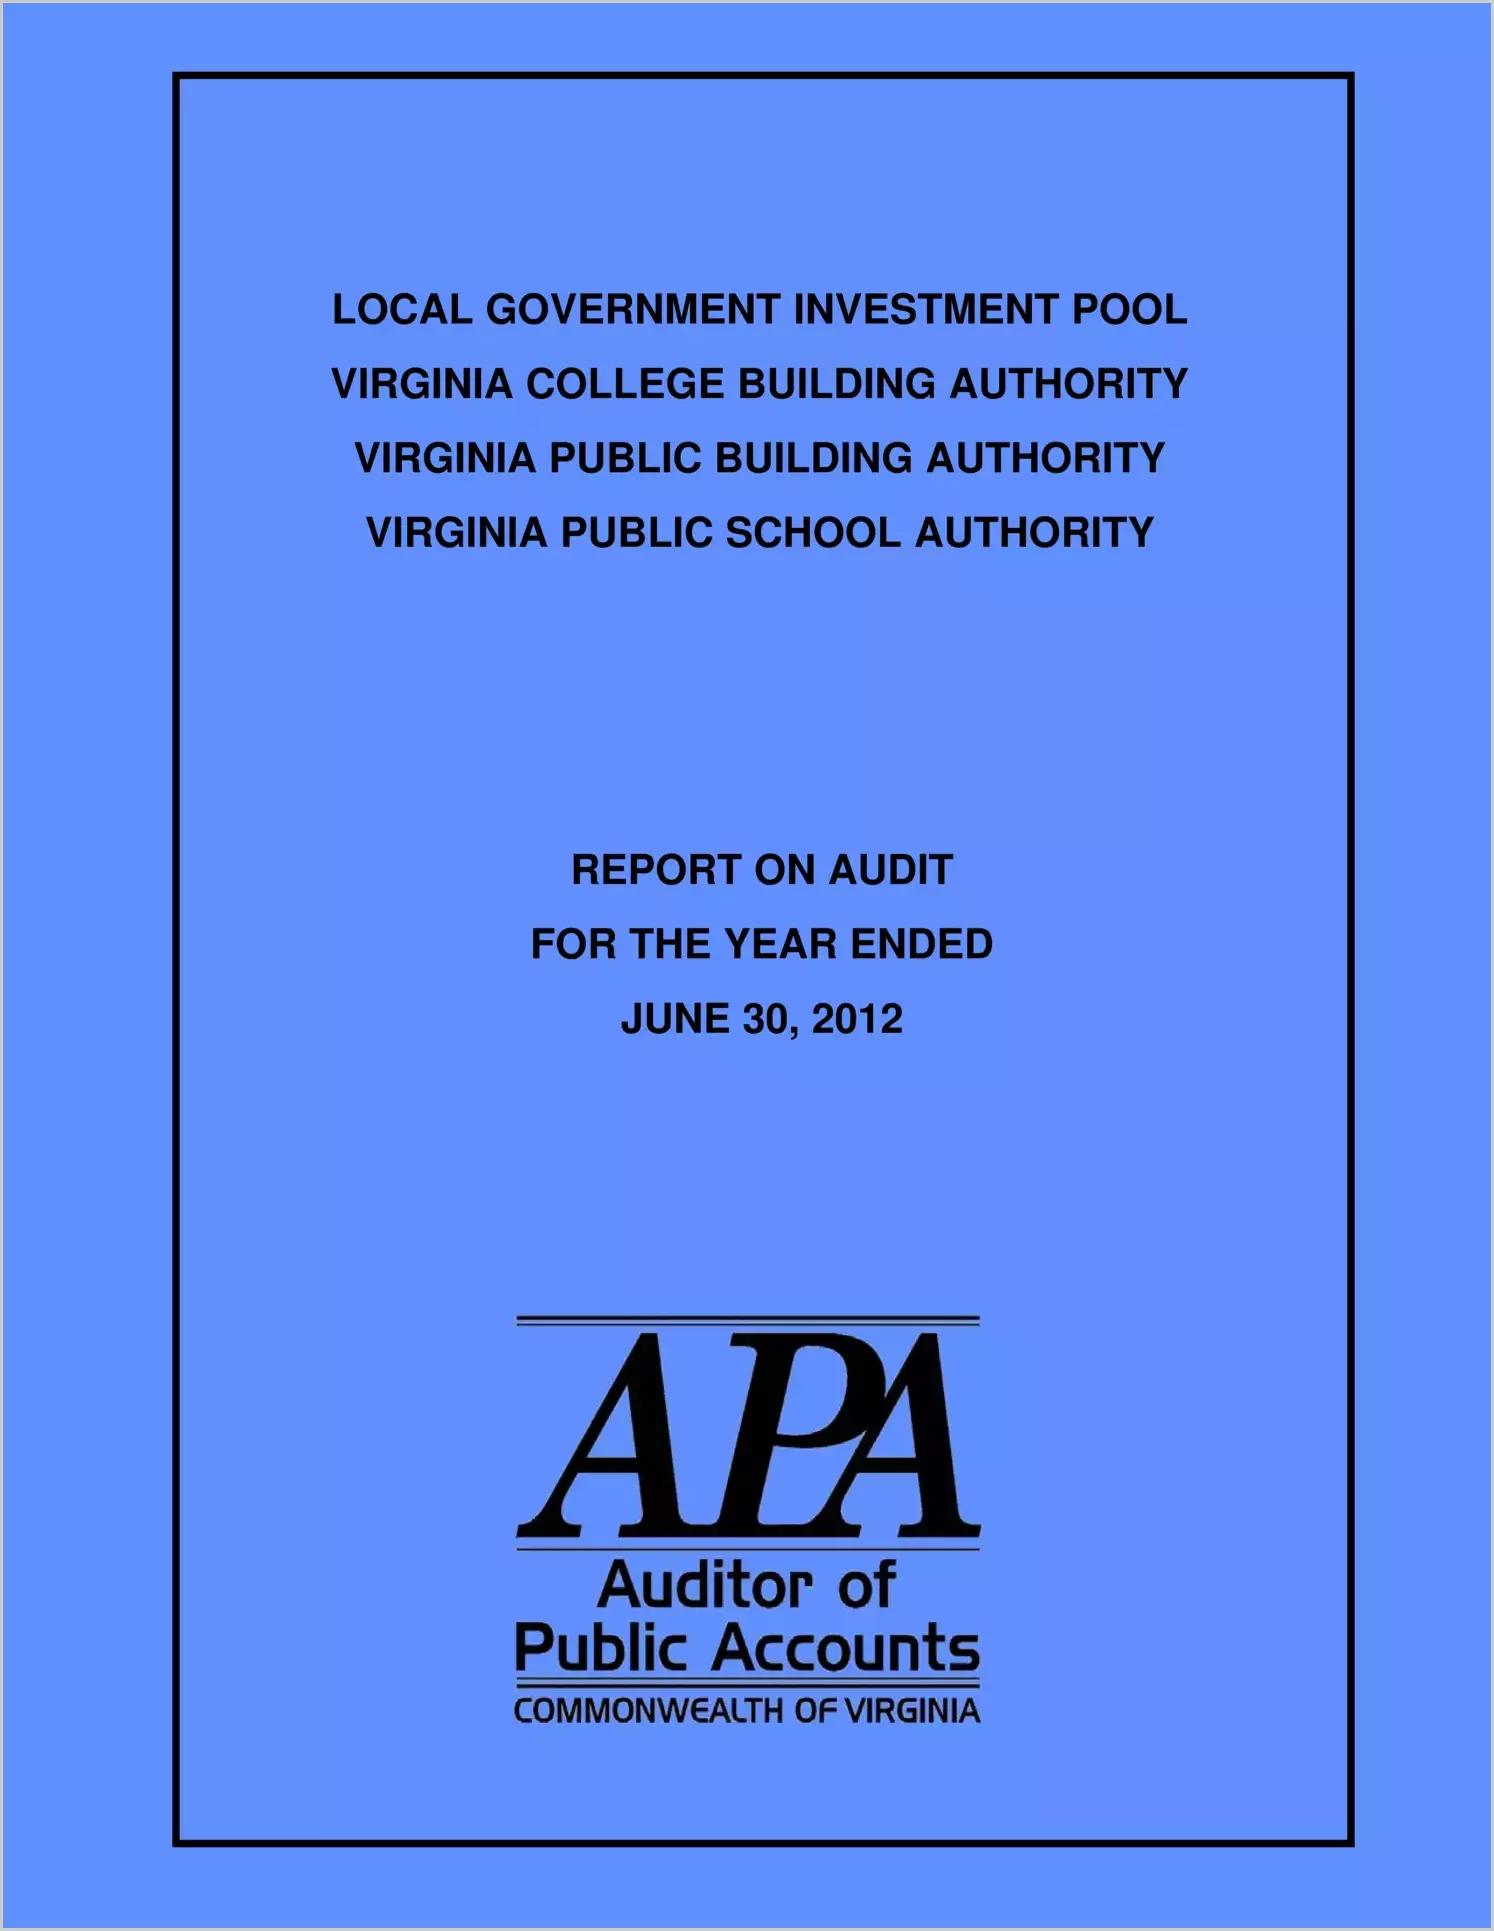 Local Government Investment Pool, Virginia College Building Authority, Virginia Public Building Authority, Virginia Public School Authority Report on Audit for Period Ended June 30, 2012